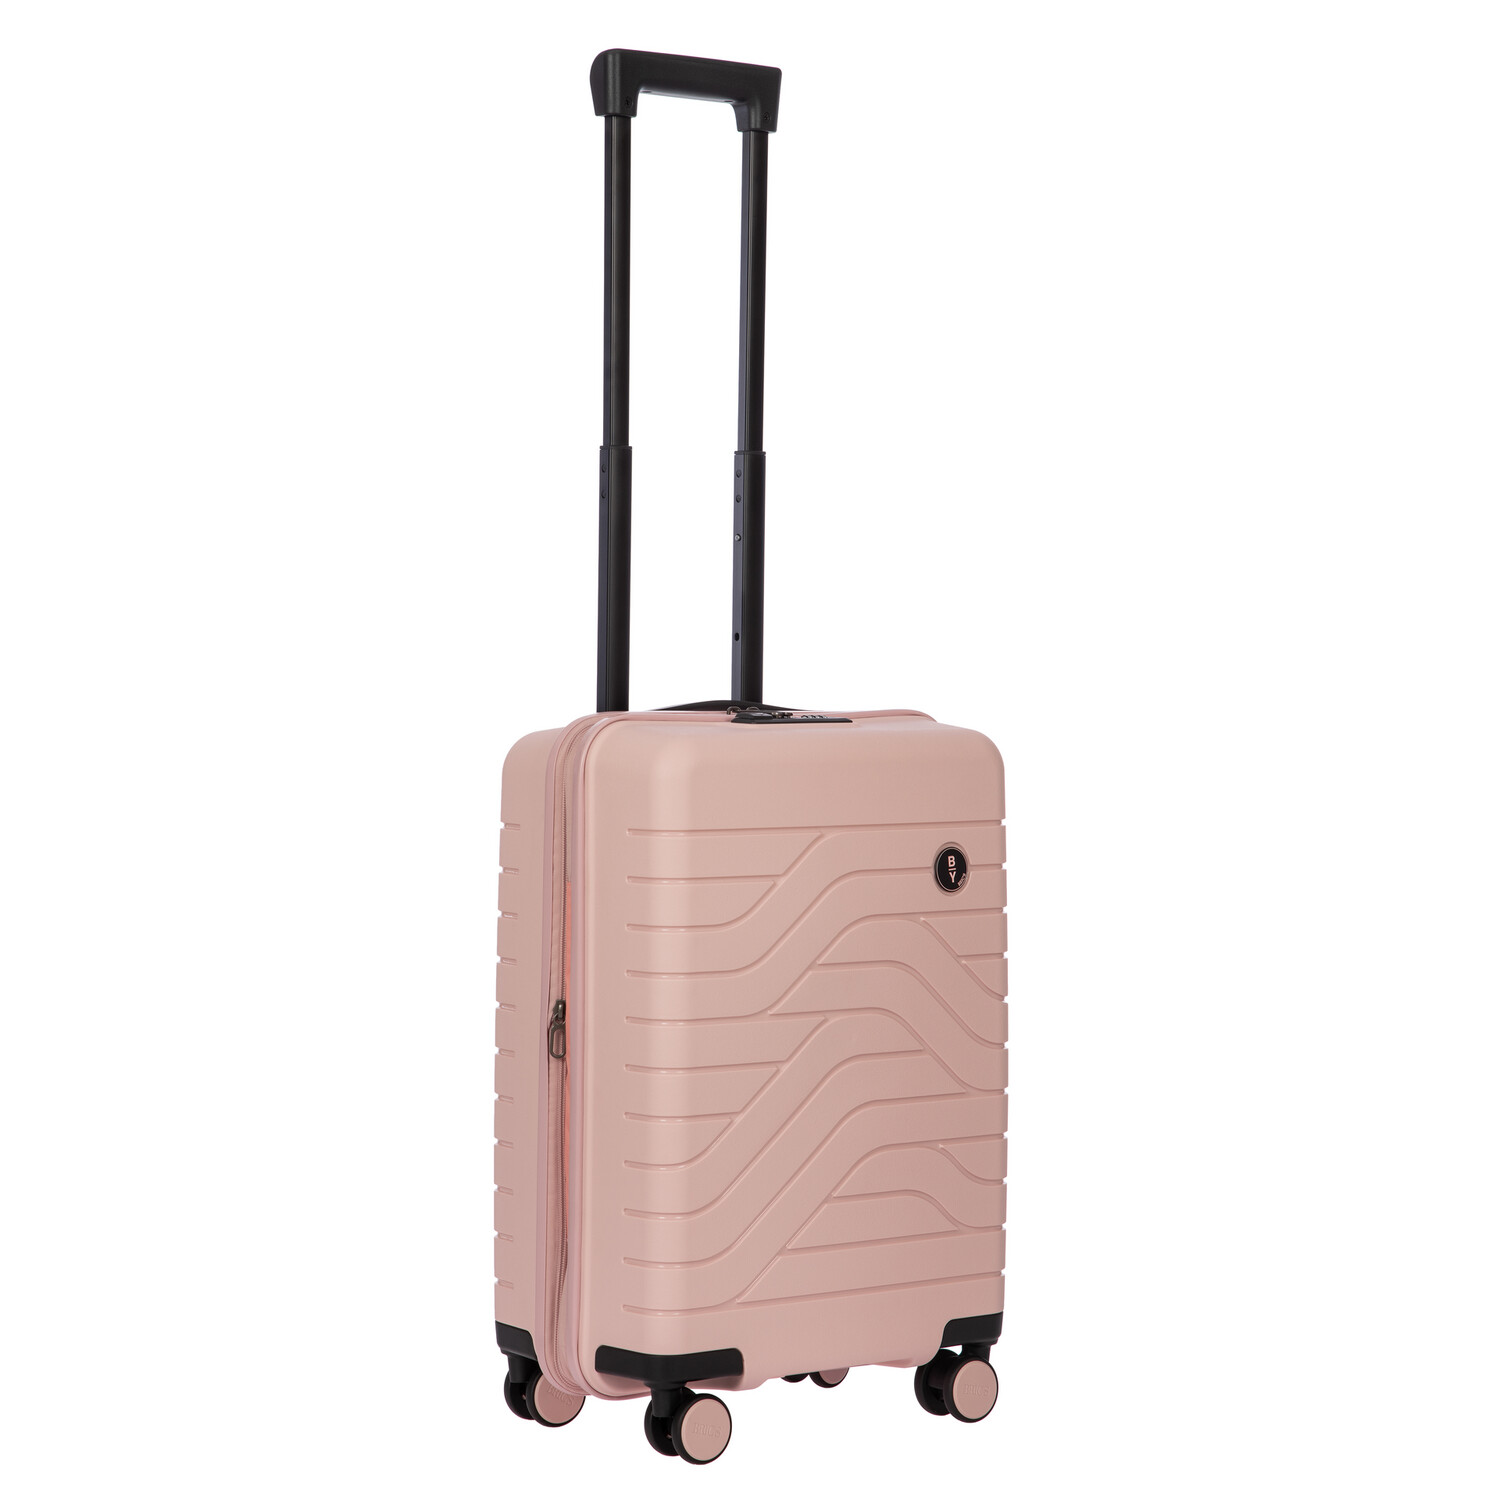 BRIC ULISEE 21" Expandable Spinner Pearl Pink